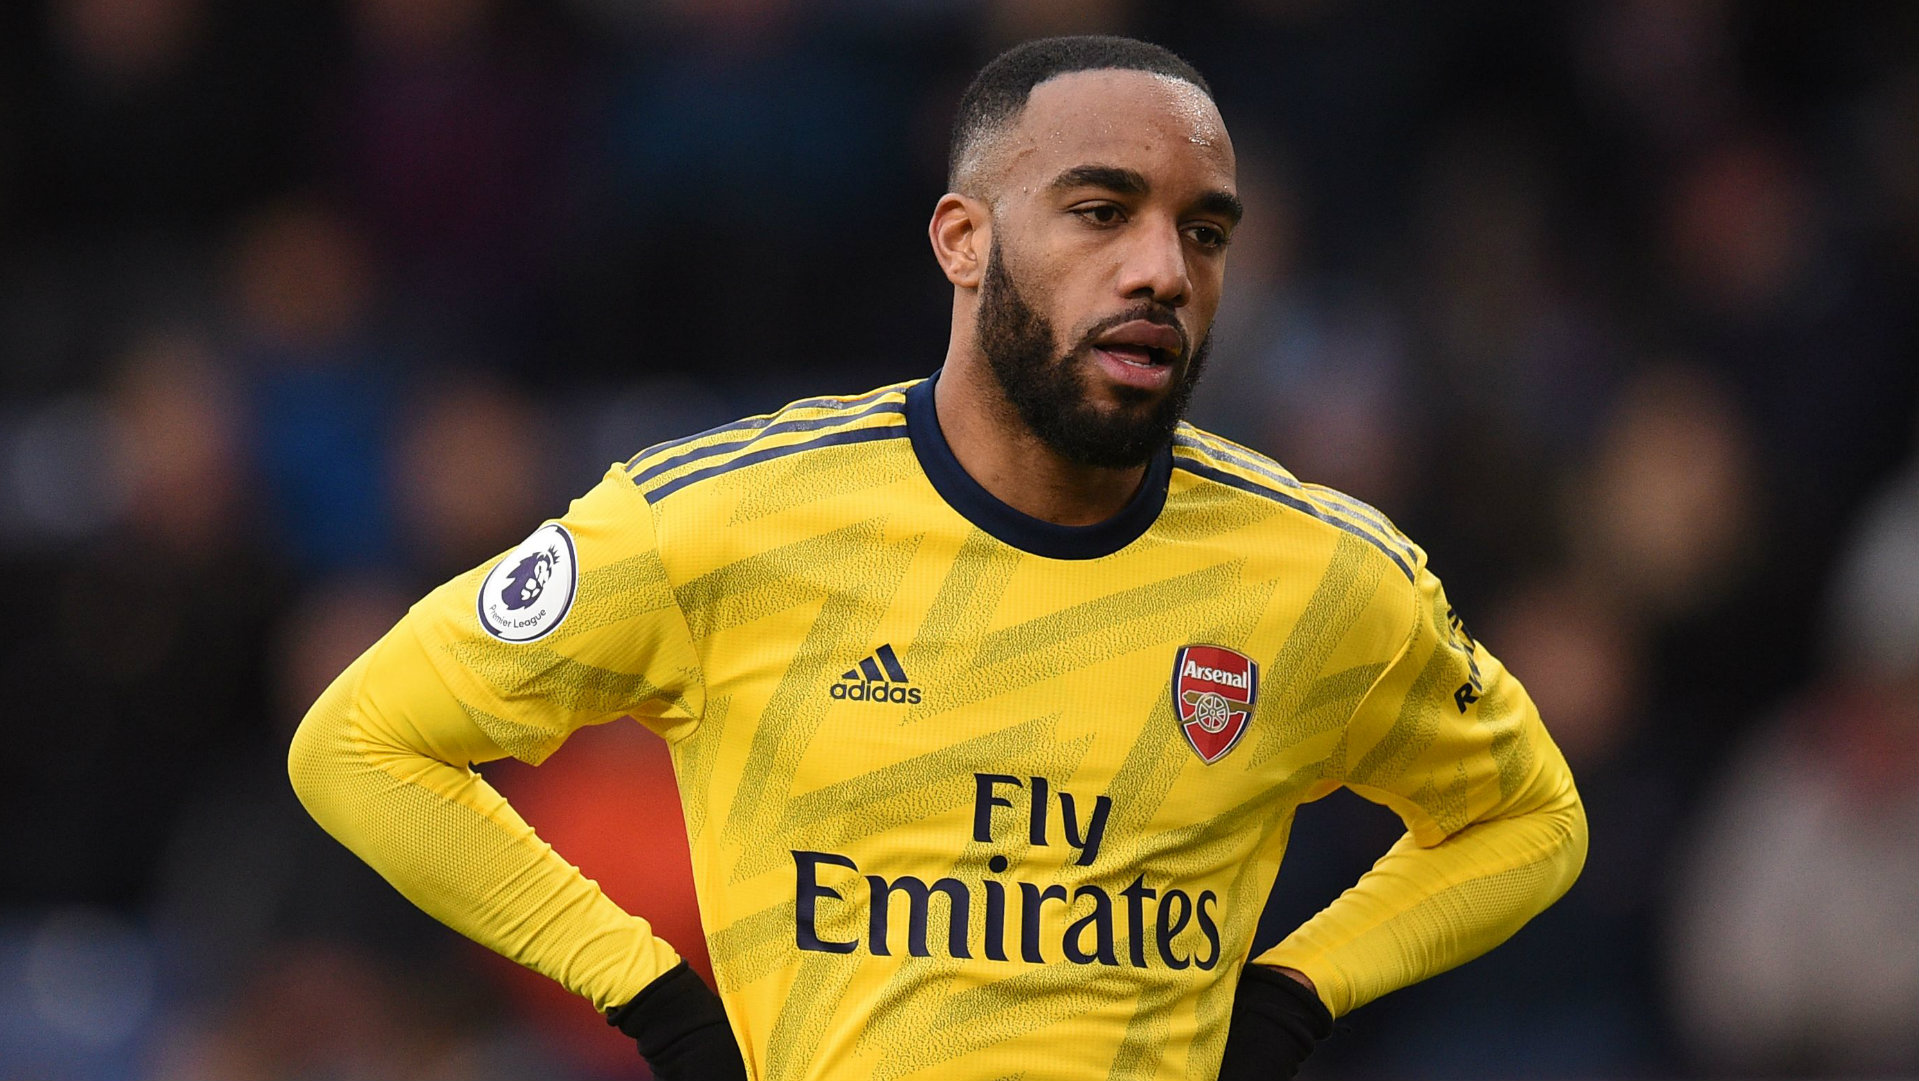 Arsenal should cash in on Lacazette to fund summer transfer spree, says Parlour